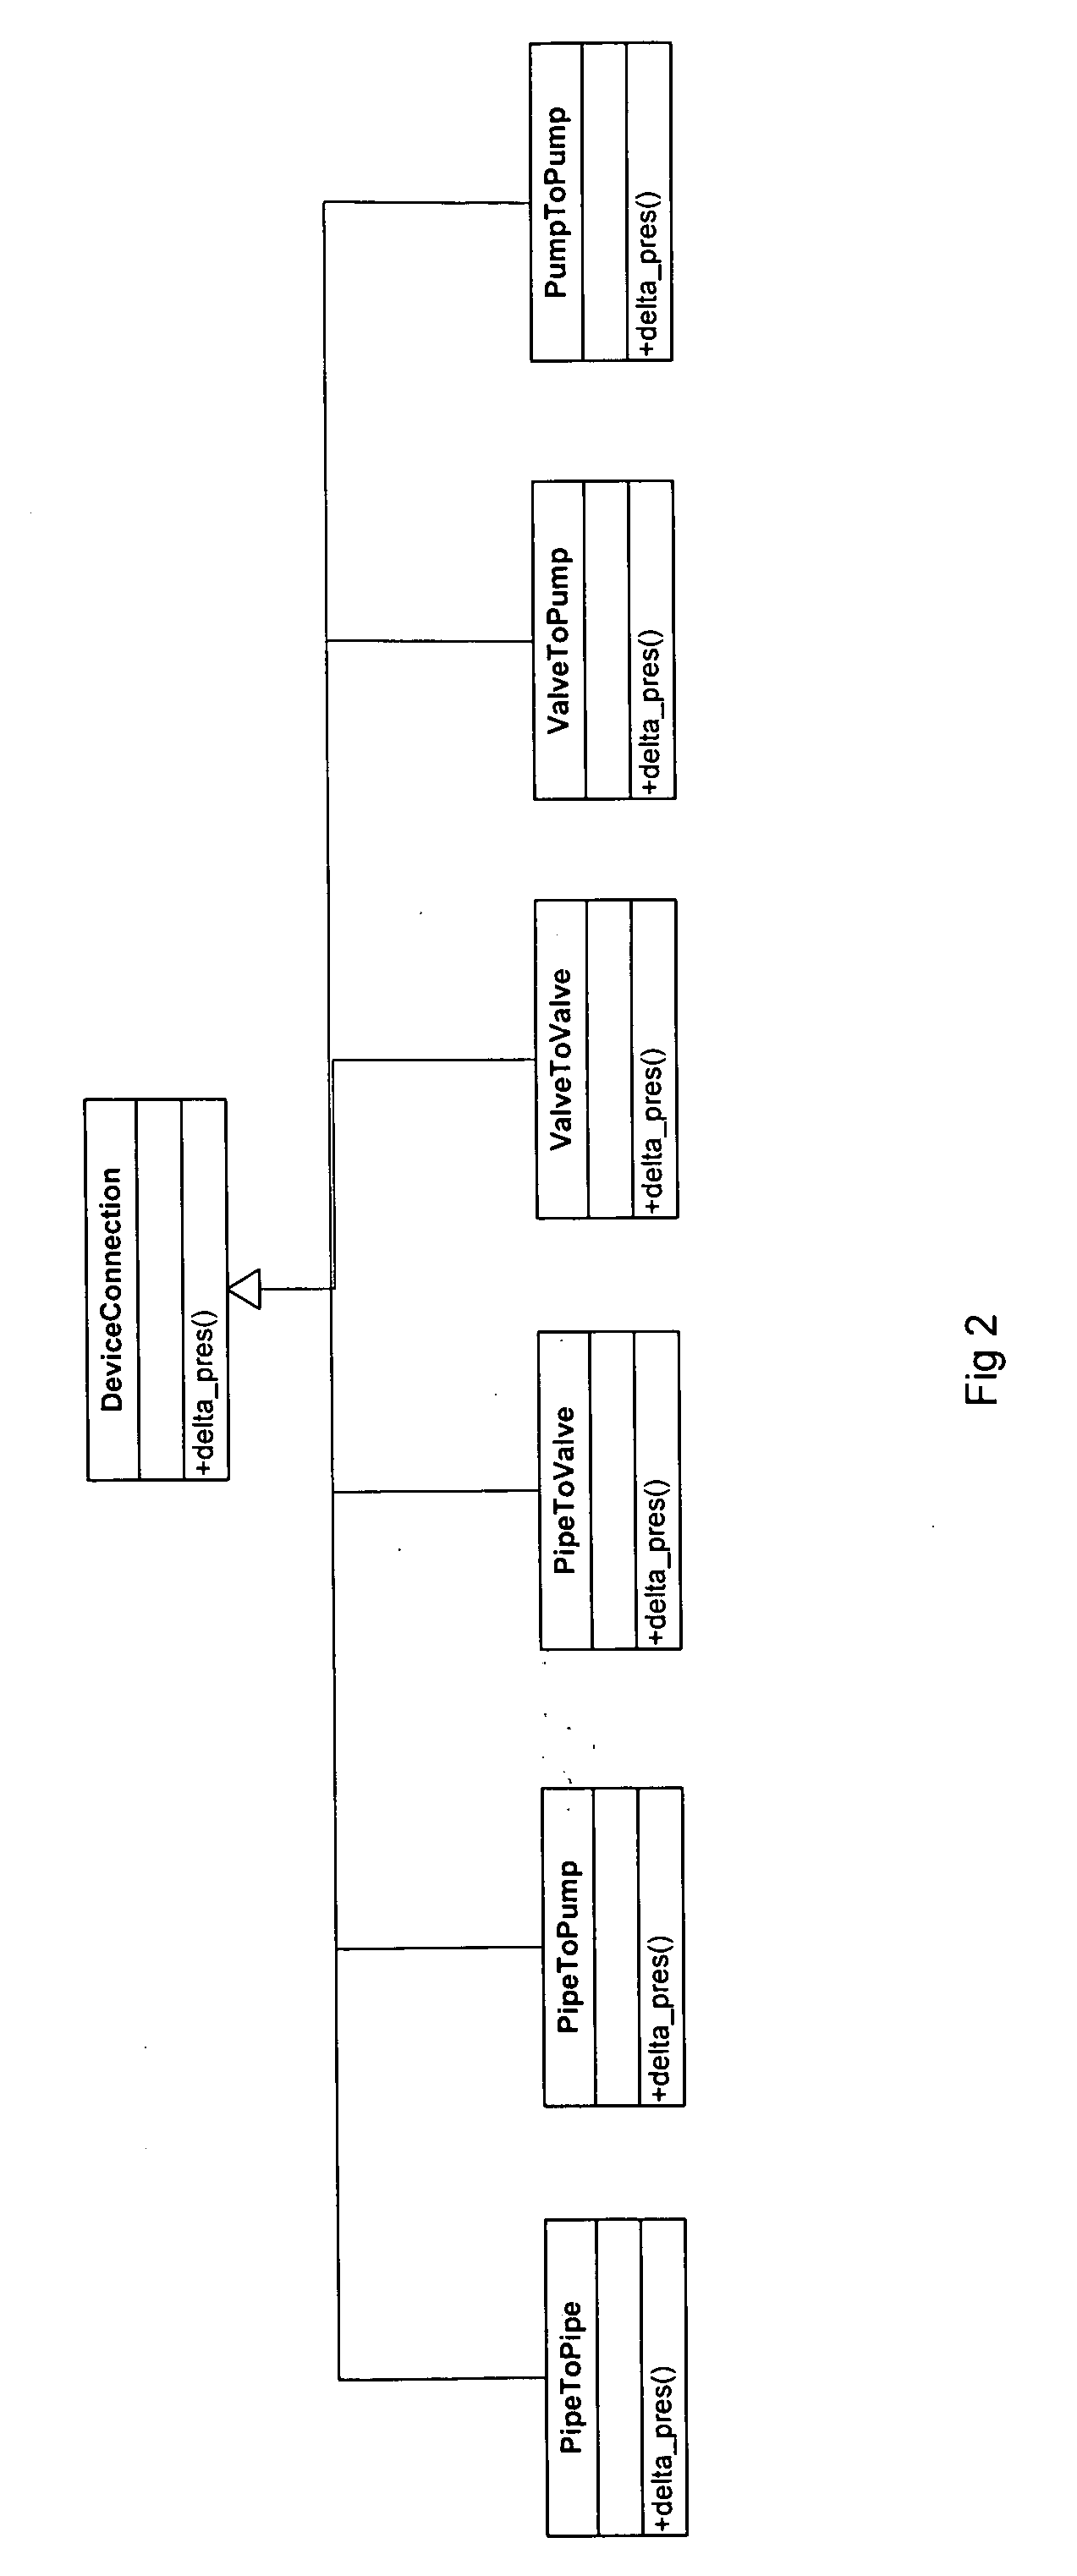 Method, system and program storage device for simulating fluid flow in a physical system using a dynamic composition based extensible object-oriented architecture